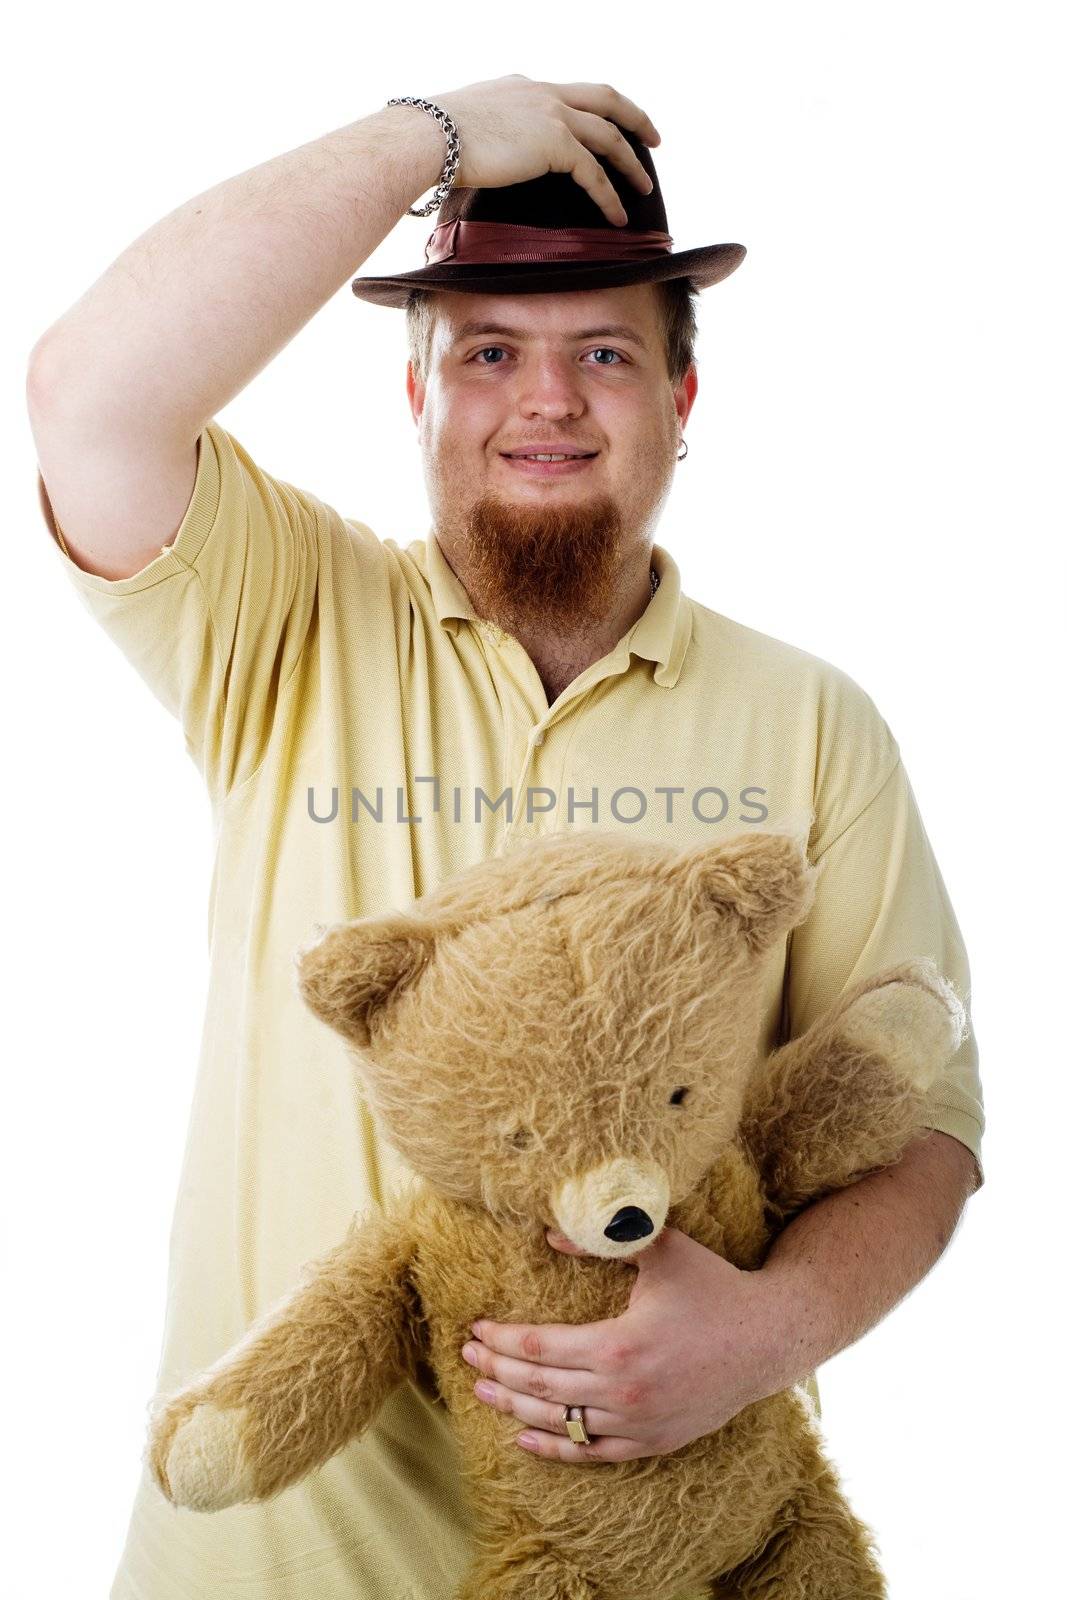 An image of a man with a hat and a toy